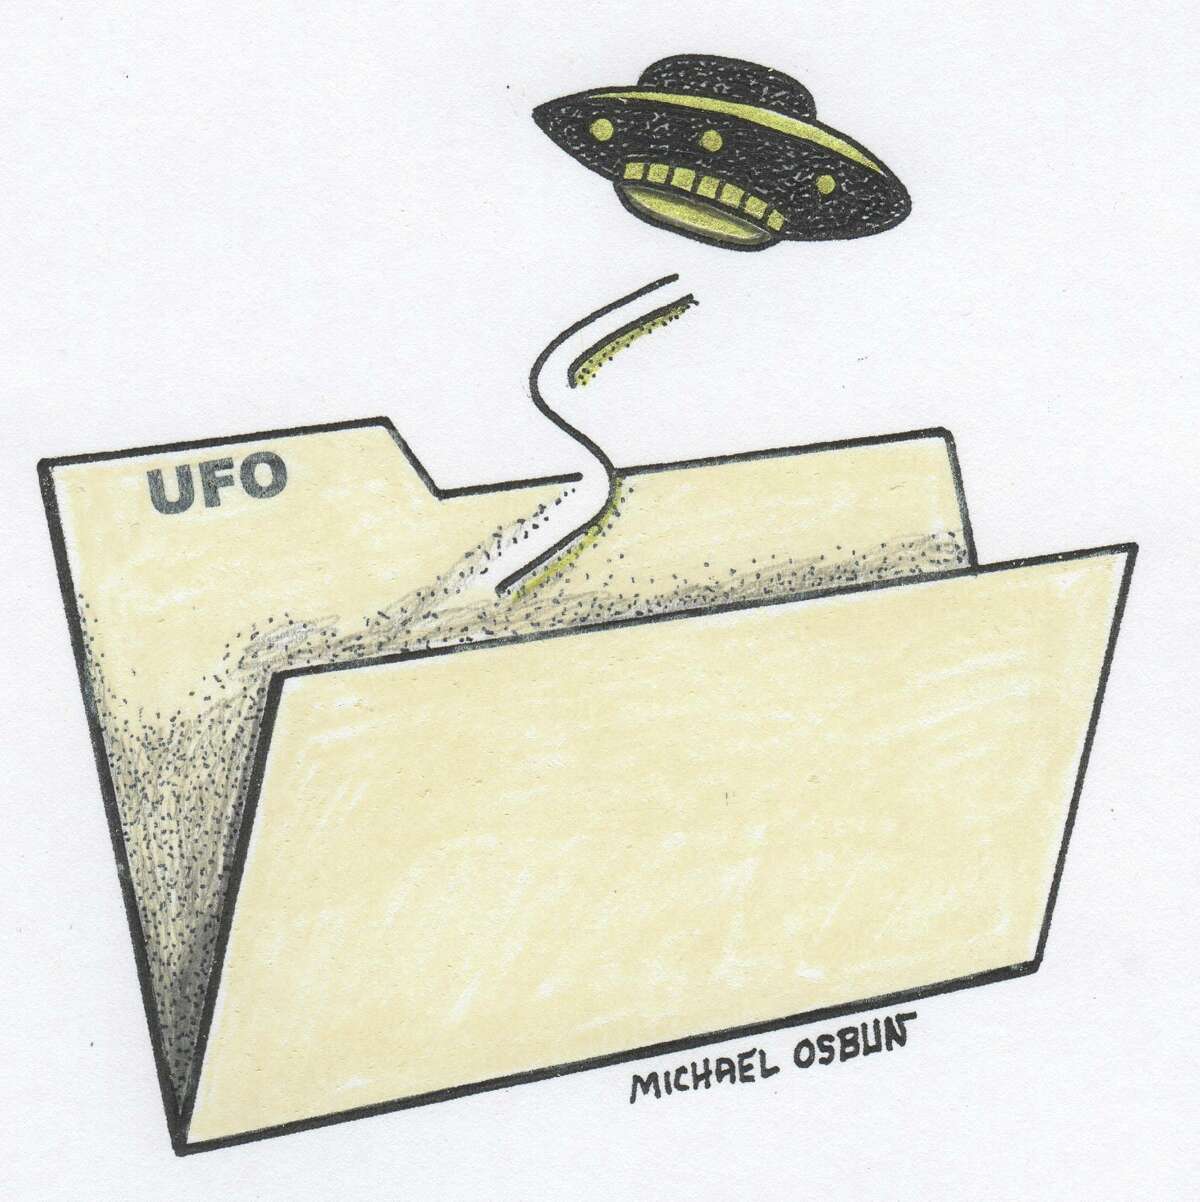 This artwork by Michael Osbun refers to UFOs.